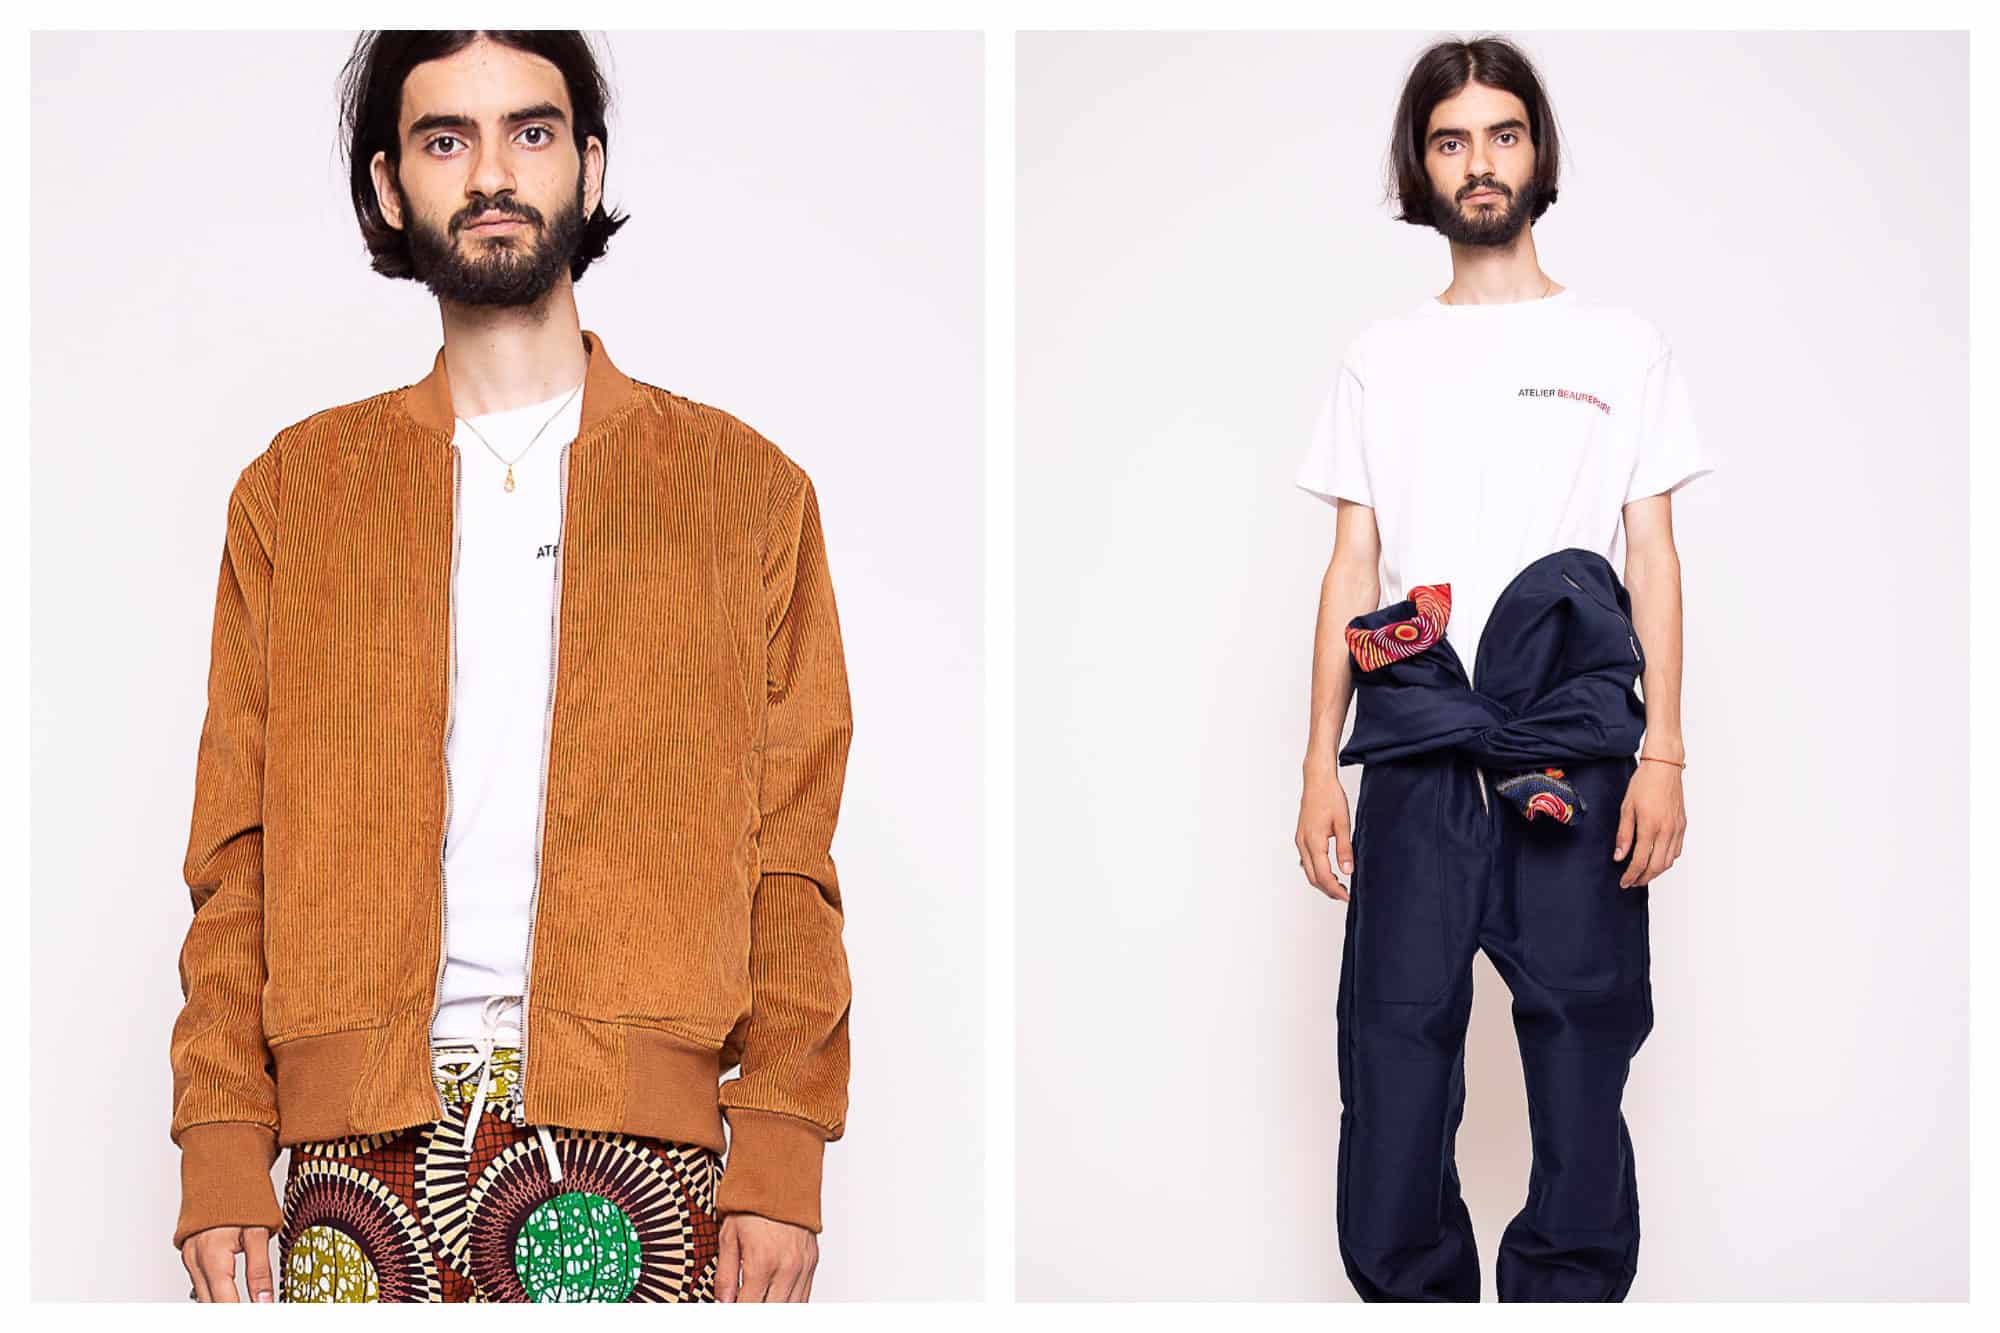 A male model wearing an orange bomber jacket and Africana print trousers (left) and a white t-whirt and jeans (right) from French menswear brand Atelier Beaurepaire.